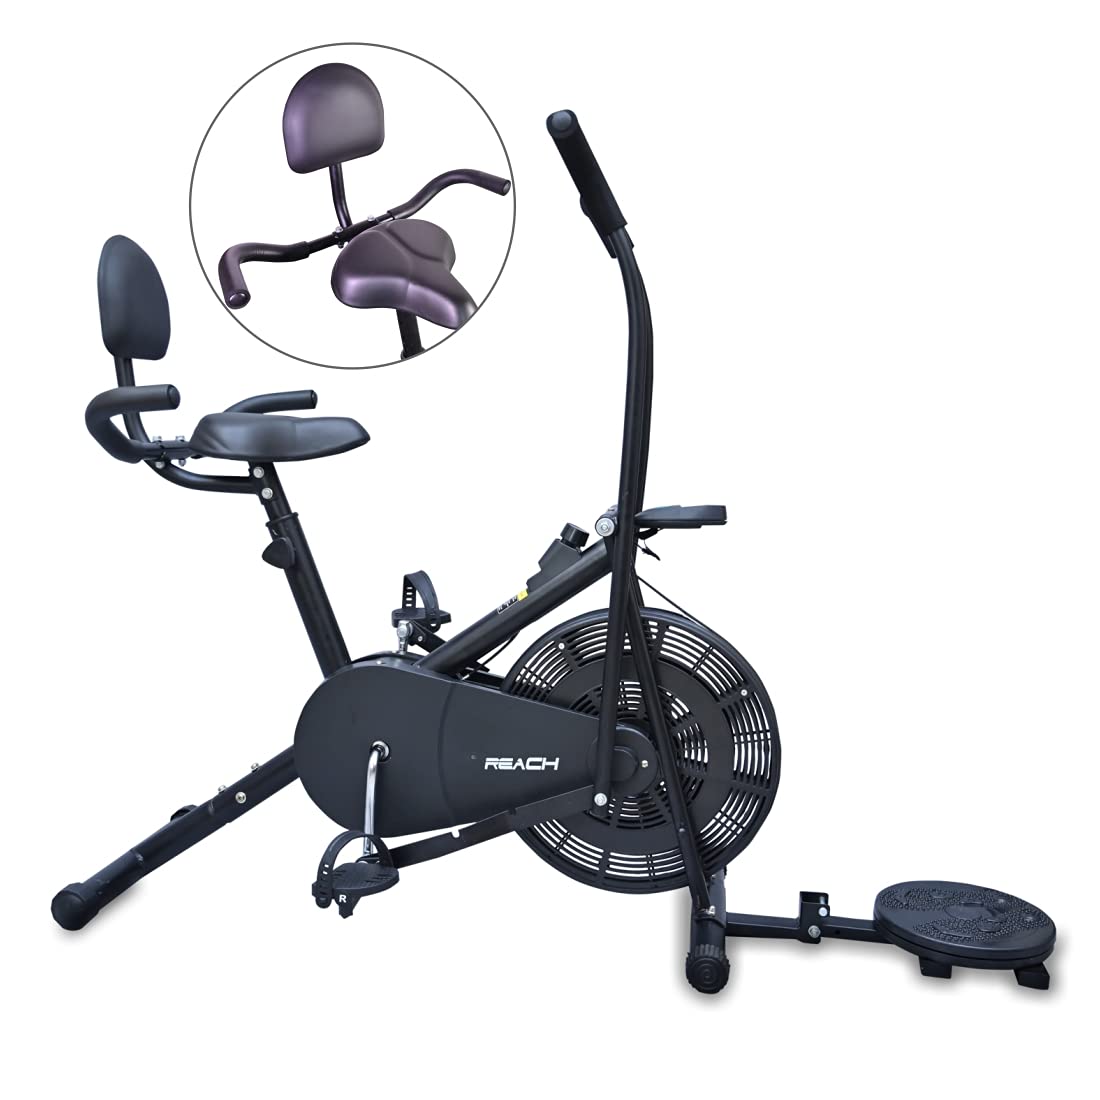 Reach AB-110 BHT Air Bike Exercise Cycle with Moving or Stationary Handle | with Back Support Seat + Side Handle + Twister | Adjustable Resistance with Cushioned Seat | Fitness Cycle for Home Gym